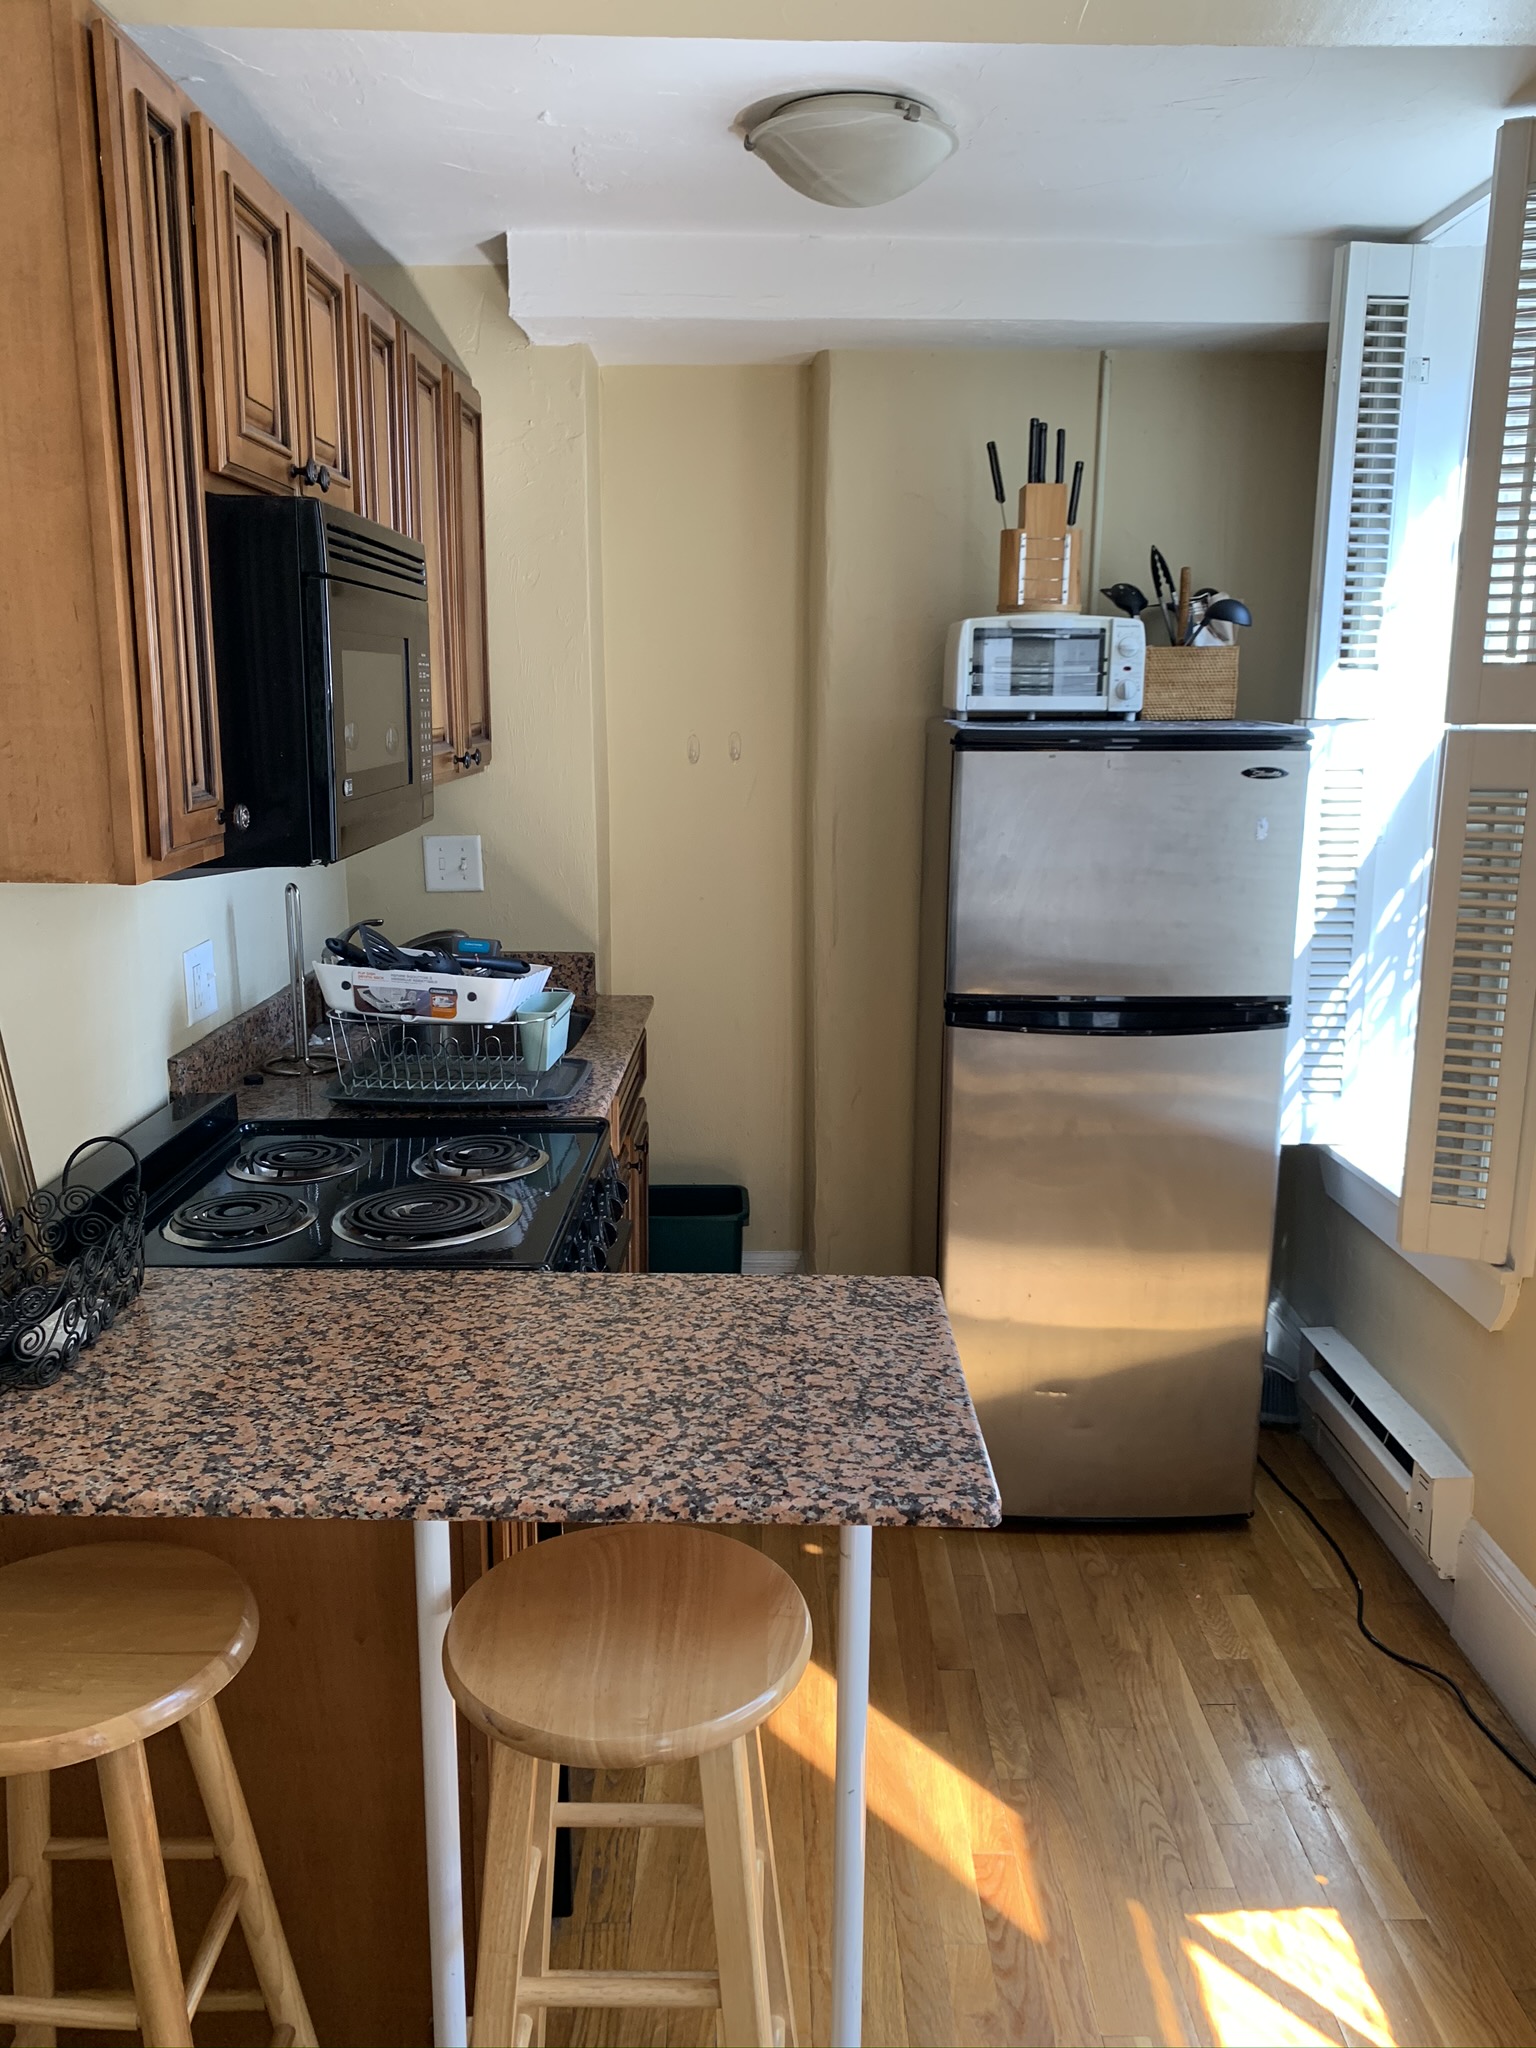 Photos of apartment on Hereford St.,Boston MA 02115